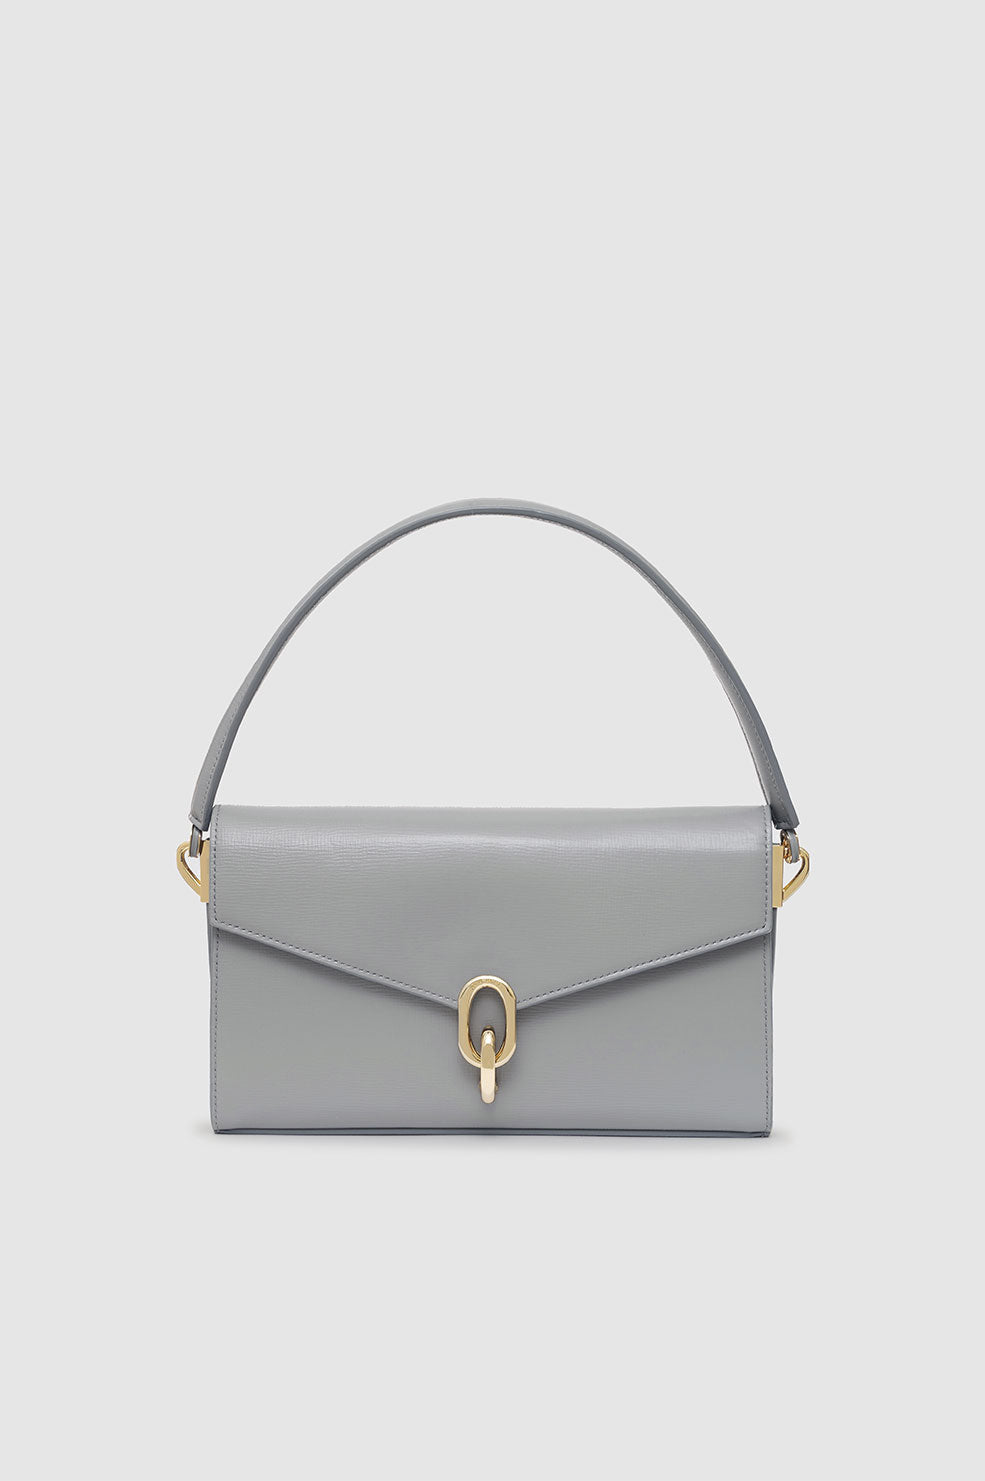 ANINE BING Colette Bag - Grey Saffiano - Front View